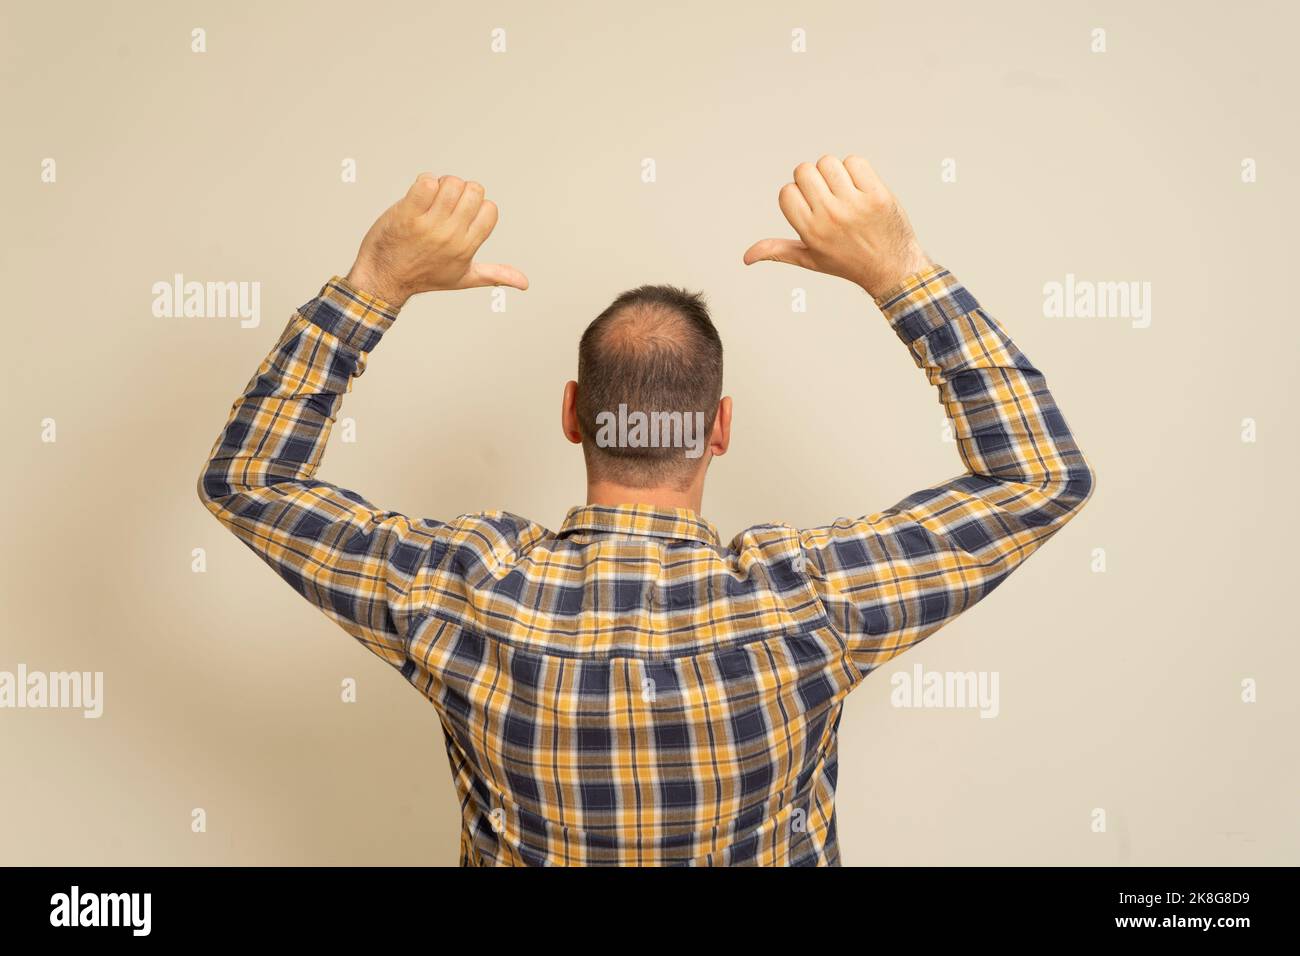 Portrait of a man with incipient alopecia from behind, raising both hands and pointing his index fingers upwards, isolated on a beige background. Stock Photo